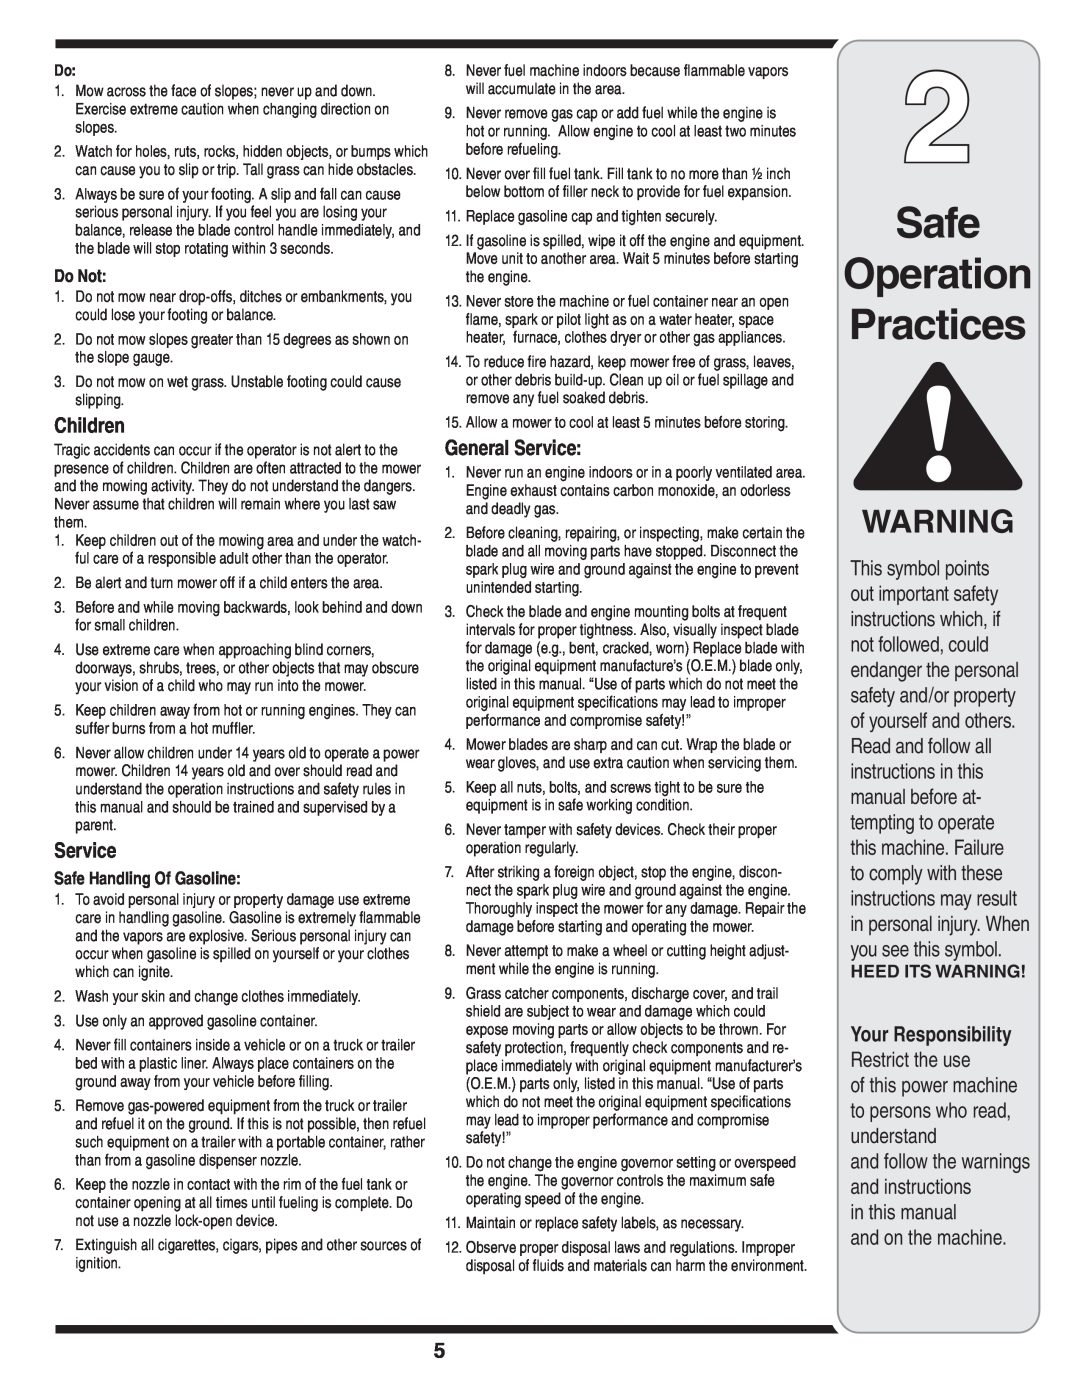 Troy-Bilt 100 warranty Safe Operation Practices, Children, General Service, in this manual and on the machine, Do Not 